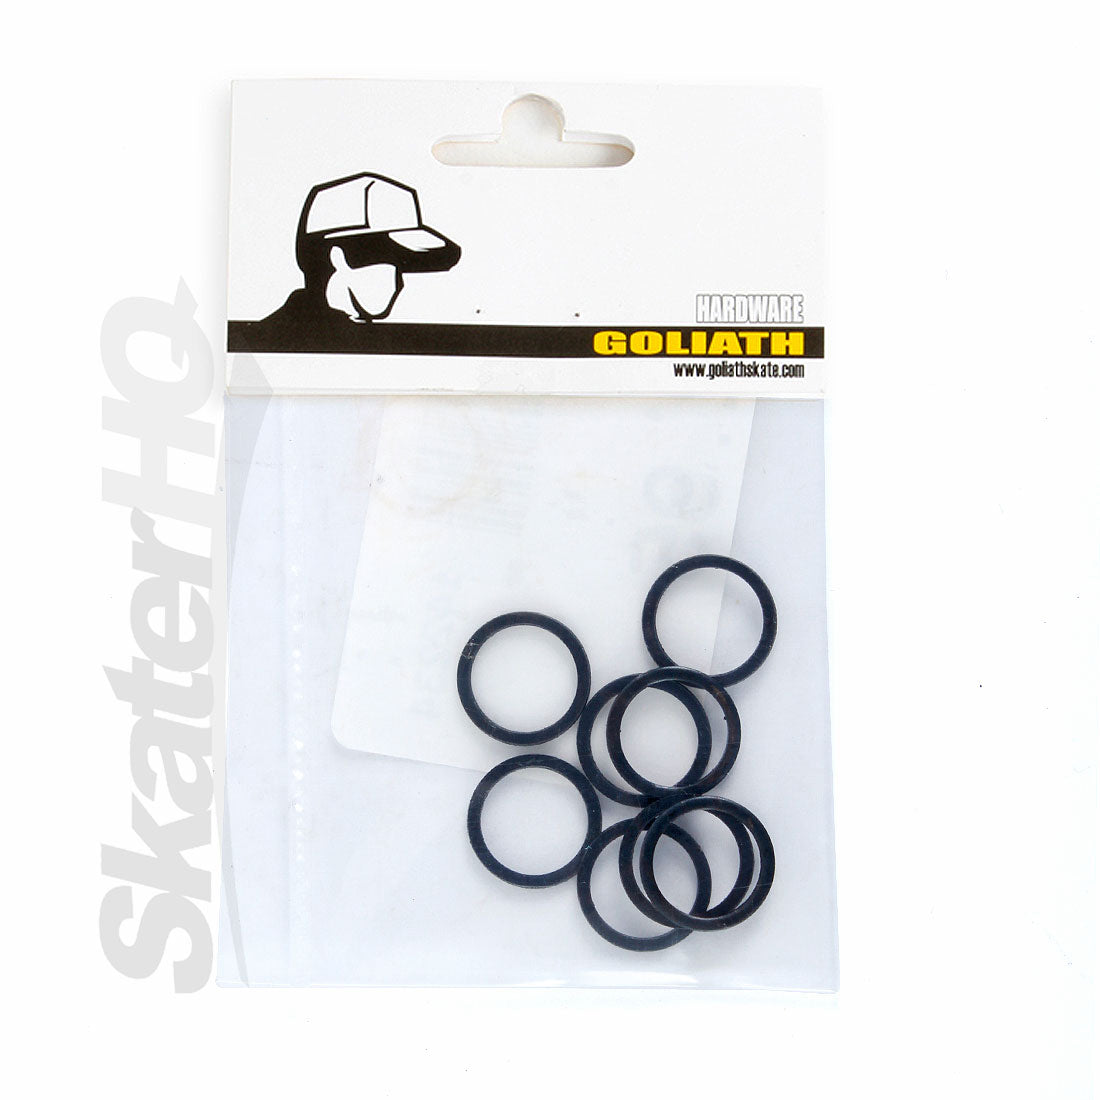 Axle Washers 8PK Skateboard Hardware and Parts